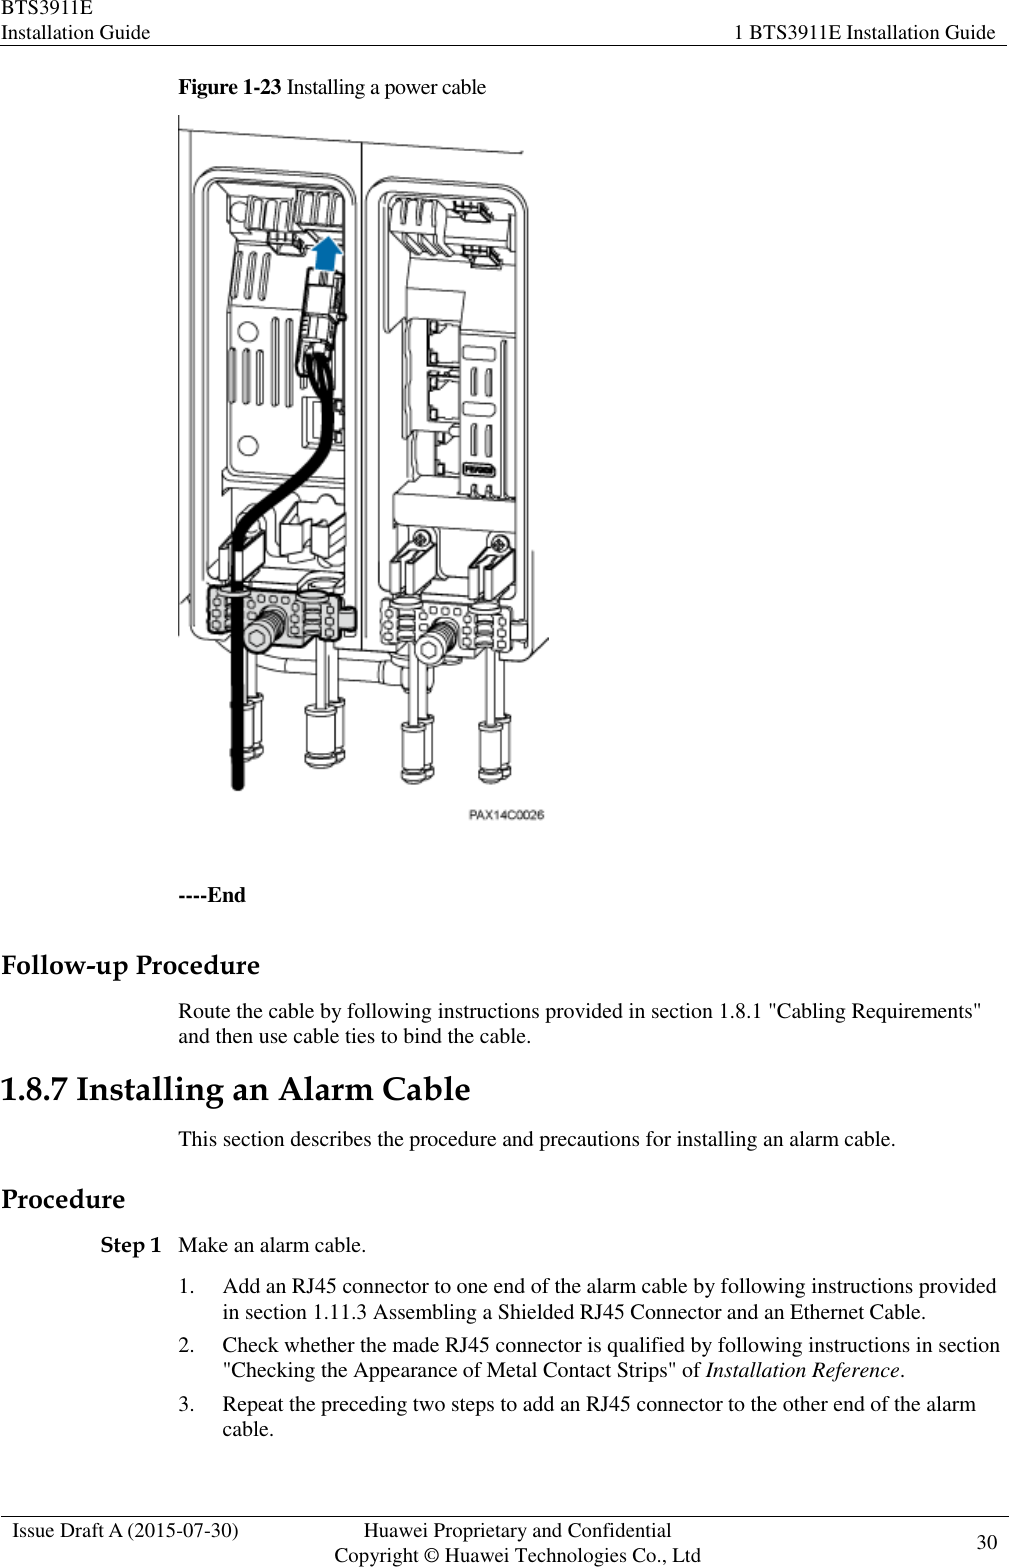 BTS3911E Installation Guide 1 BTS3911E Installation Guide  Issue Draft A (2015-07-30) Huawei Proprietary and Confidential           Copyright © Huawei Technologies Co., Ltd 30    Figure 1-23 Installing a power cable   ----End Follow-up Procedure Route the cable by following instructions provided in section 1.8.1 &quot;Cabling Requirements&quot; and then use cable ties to bind the cable. 1.8.7 Installing an Alarm Cable This section describes the procedure and precautions for installing an alarm cable.   Procedure Step 1 Make an alarm cable. 1. Add an RJ45 connector to one end of the alarm cable by following instructions provided in section 1.11.3 Assembling a Shielded RJ45 Connector and an Ethernet Cable. 2. Check whether the made RJ45 connector is qualified by following instructions in section &quot;Checking the Appearance of Metal Contact Strips&quot; of Installation Reference. 3. Repeat the preceding two steps to add an RJ45 connector to the other end of the alarm cable. 